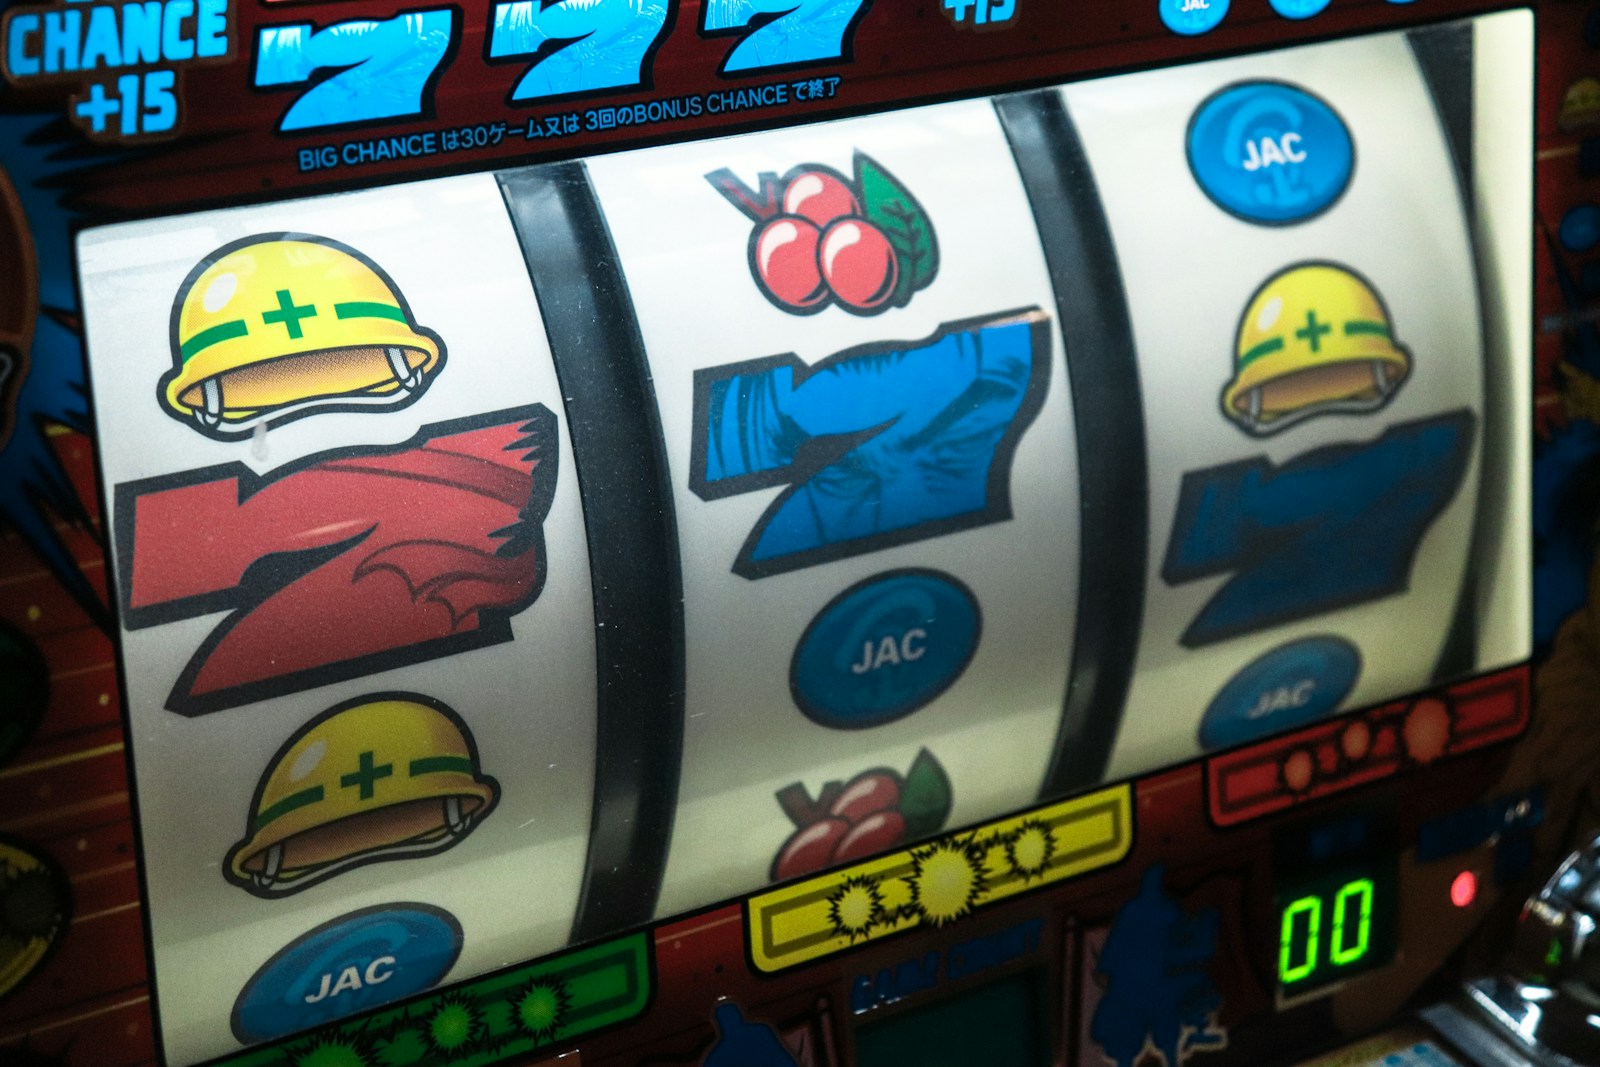 Are Classic Slots With 1 Pay Line Still Hanging on for Dear Life?